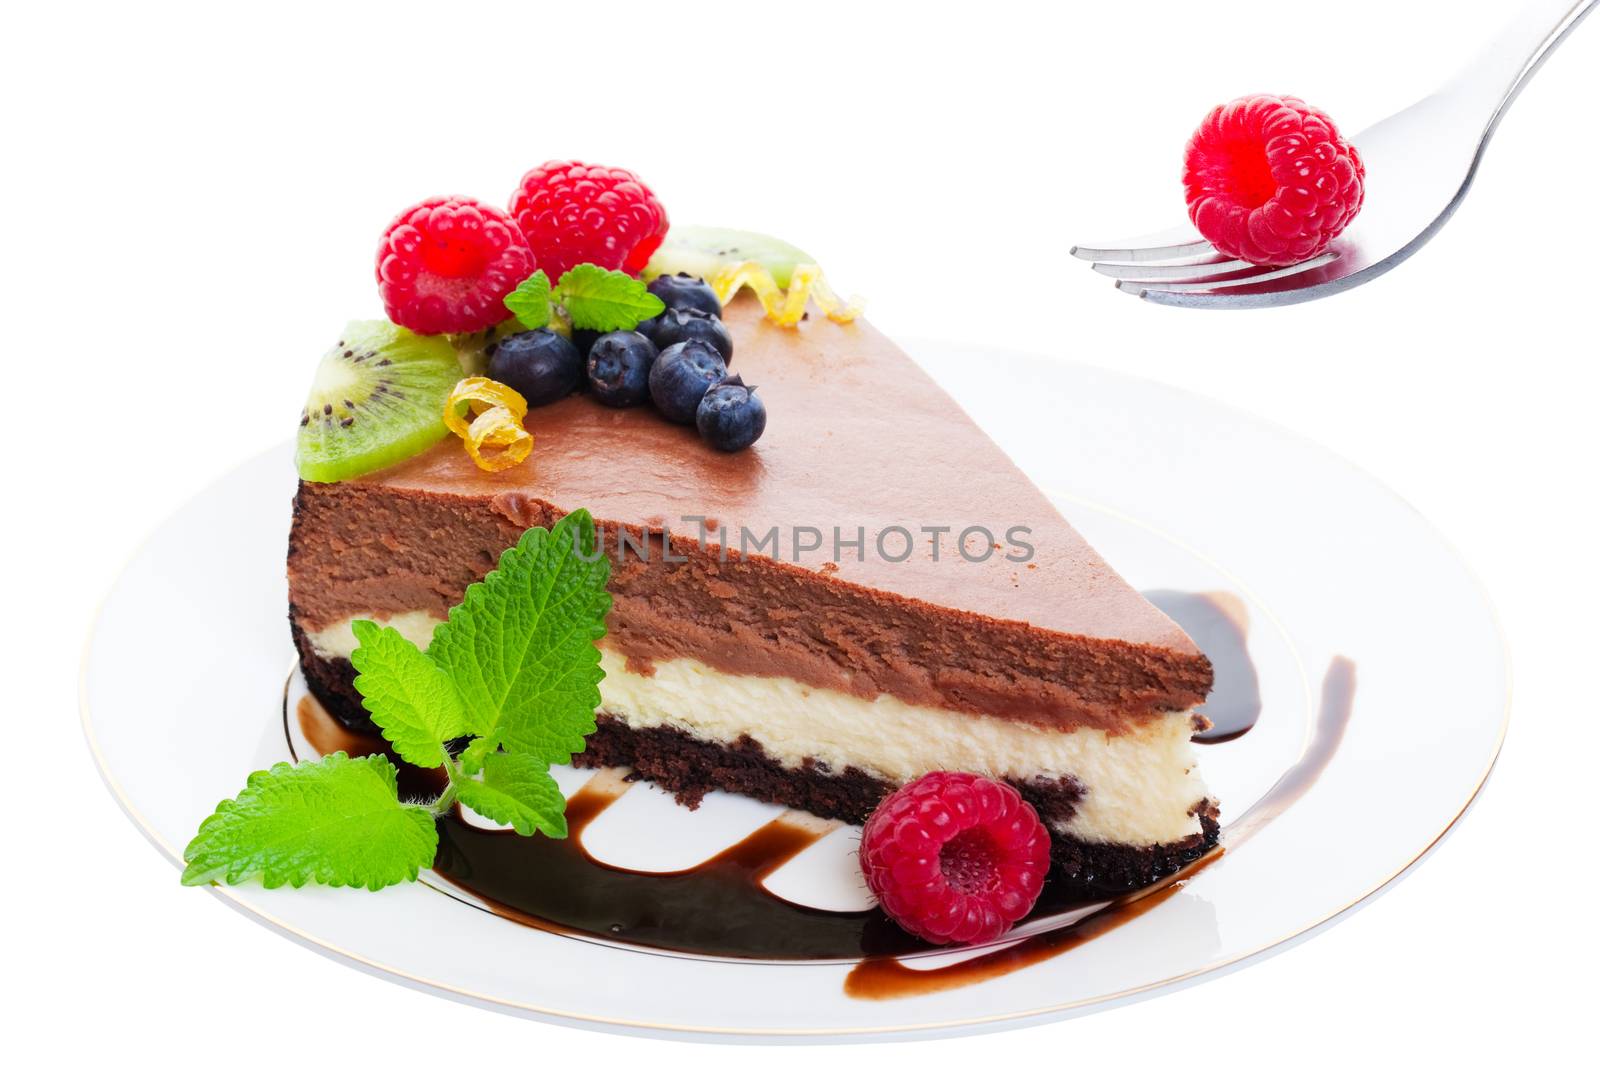 Triple Layer Chocolate Cheesecake by songbird839